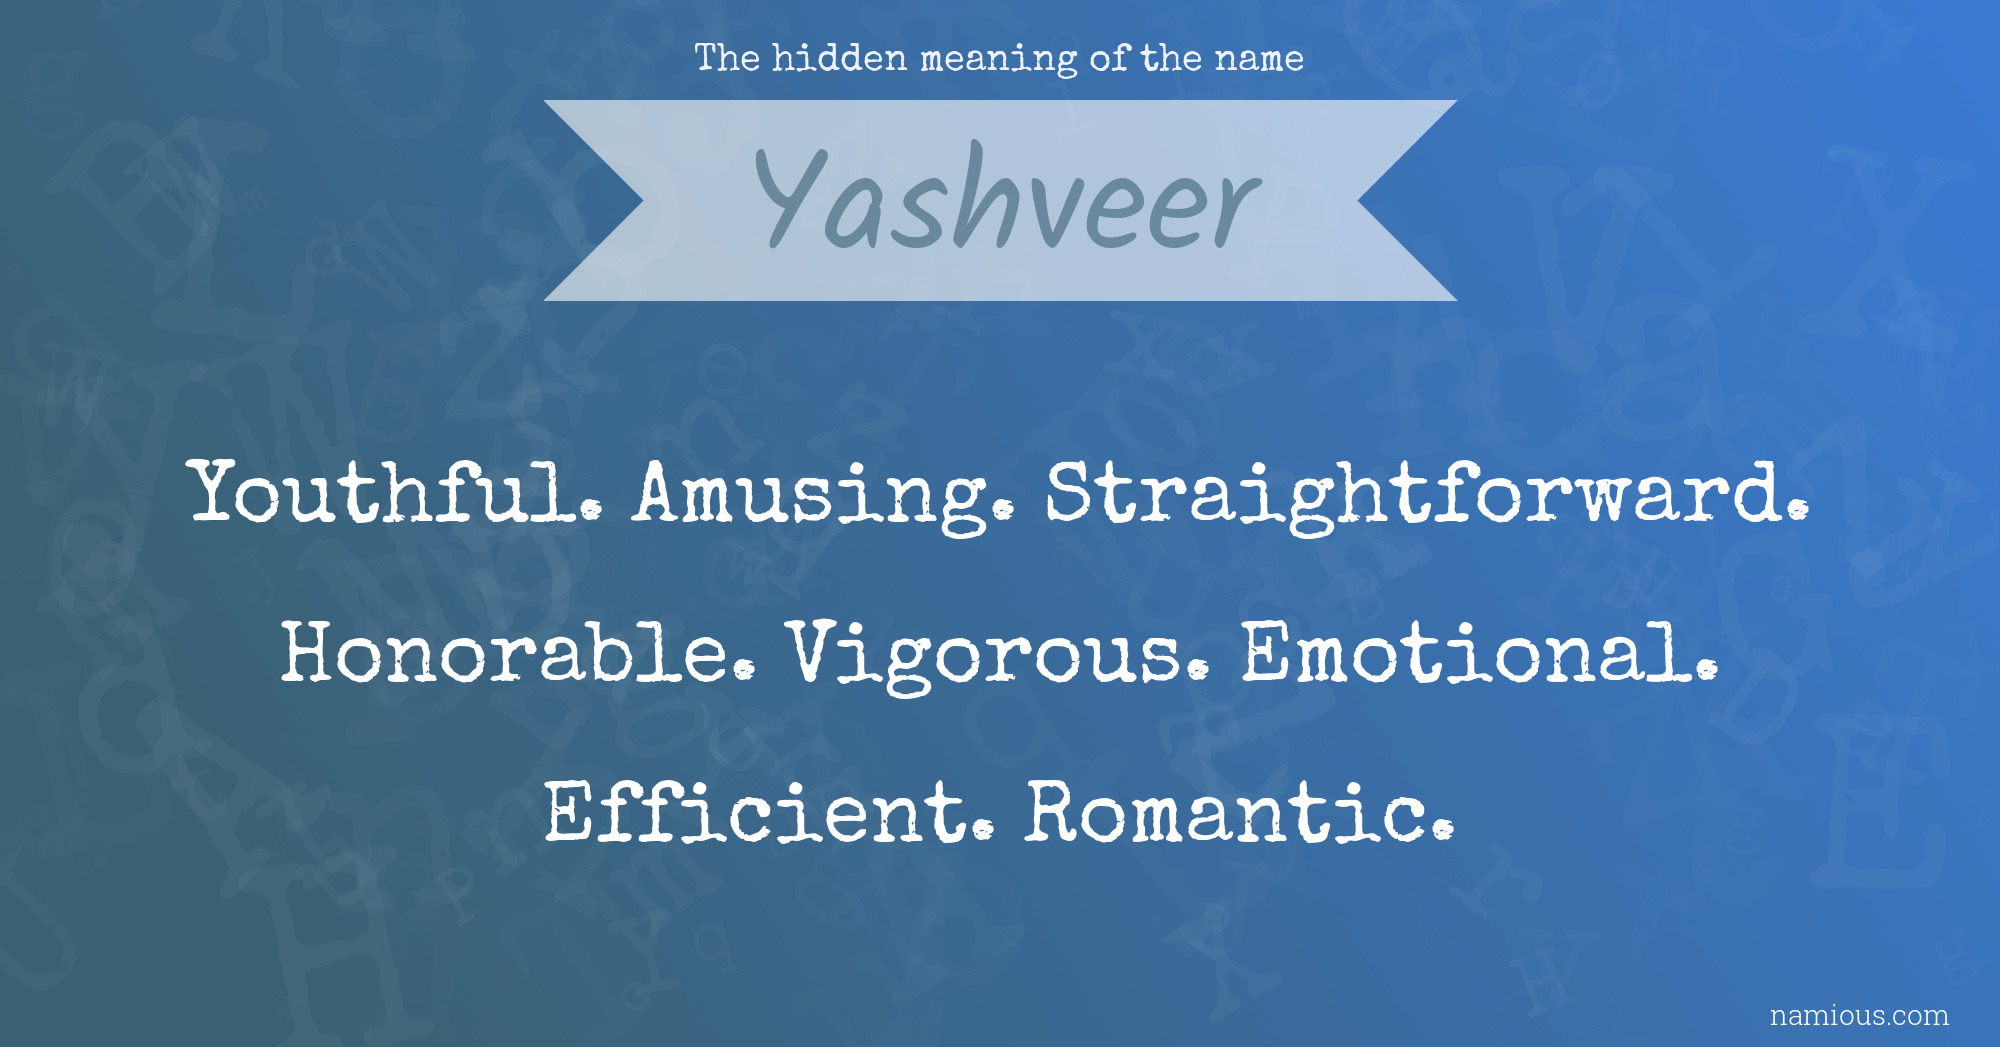 The hidden meaning of the name Yashveer